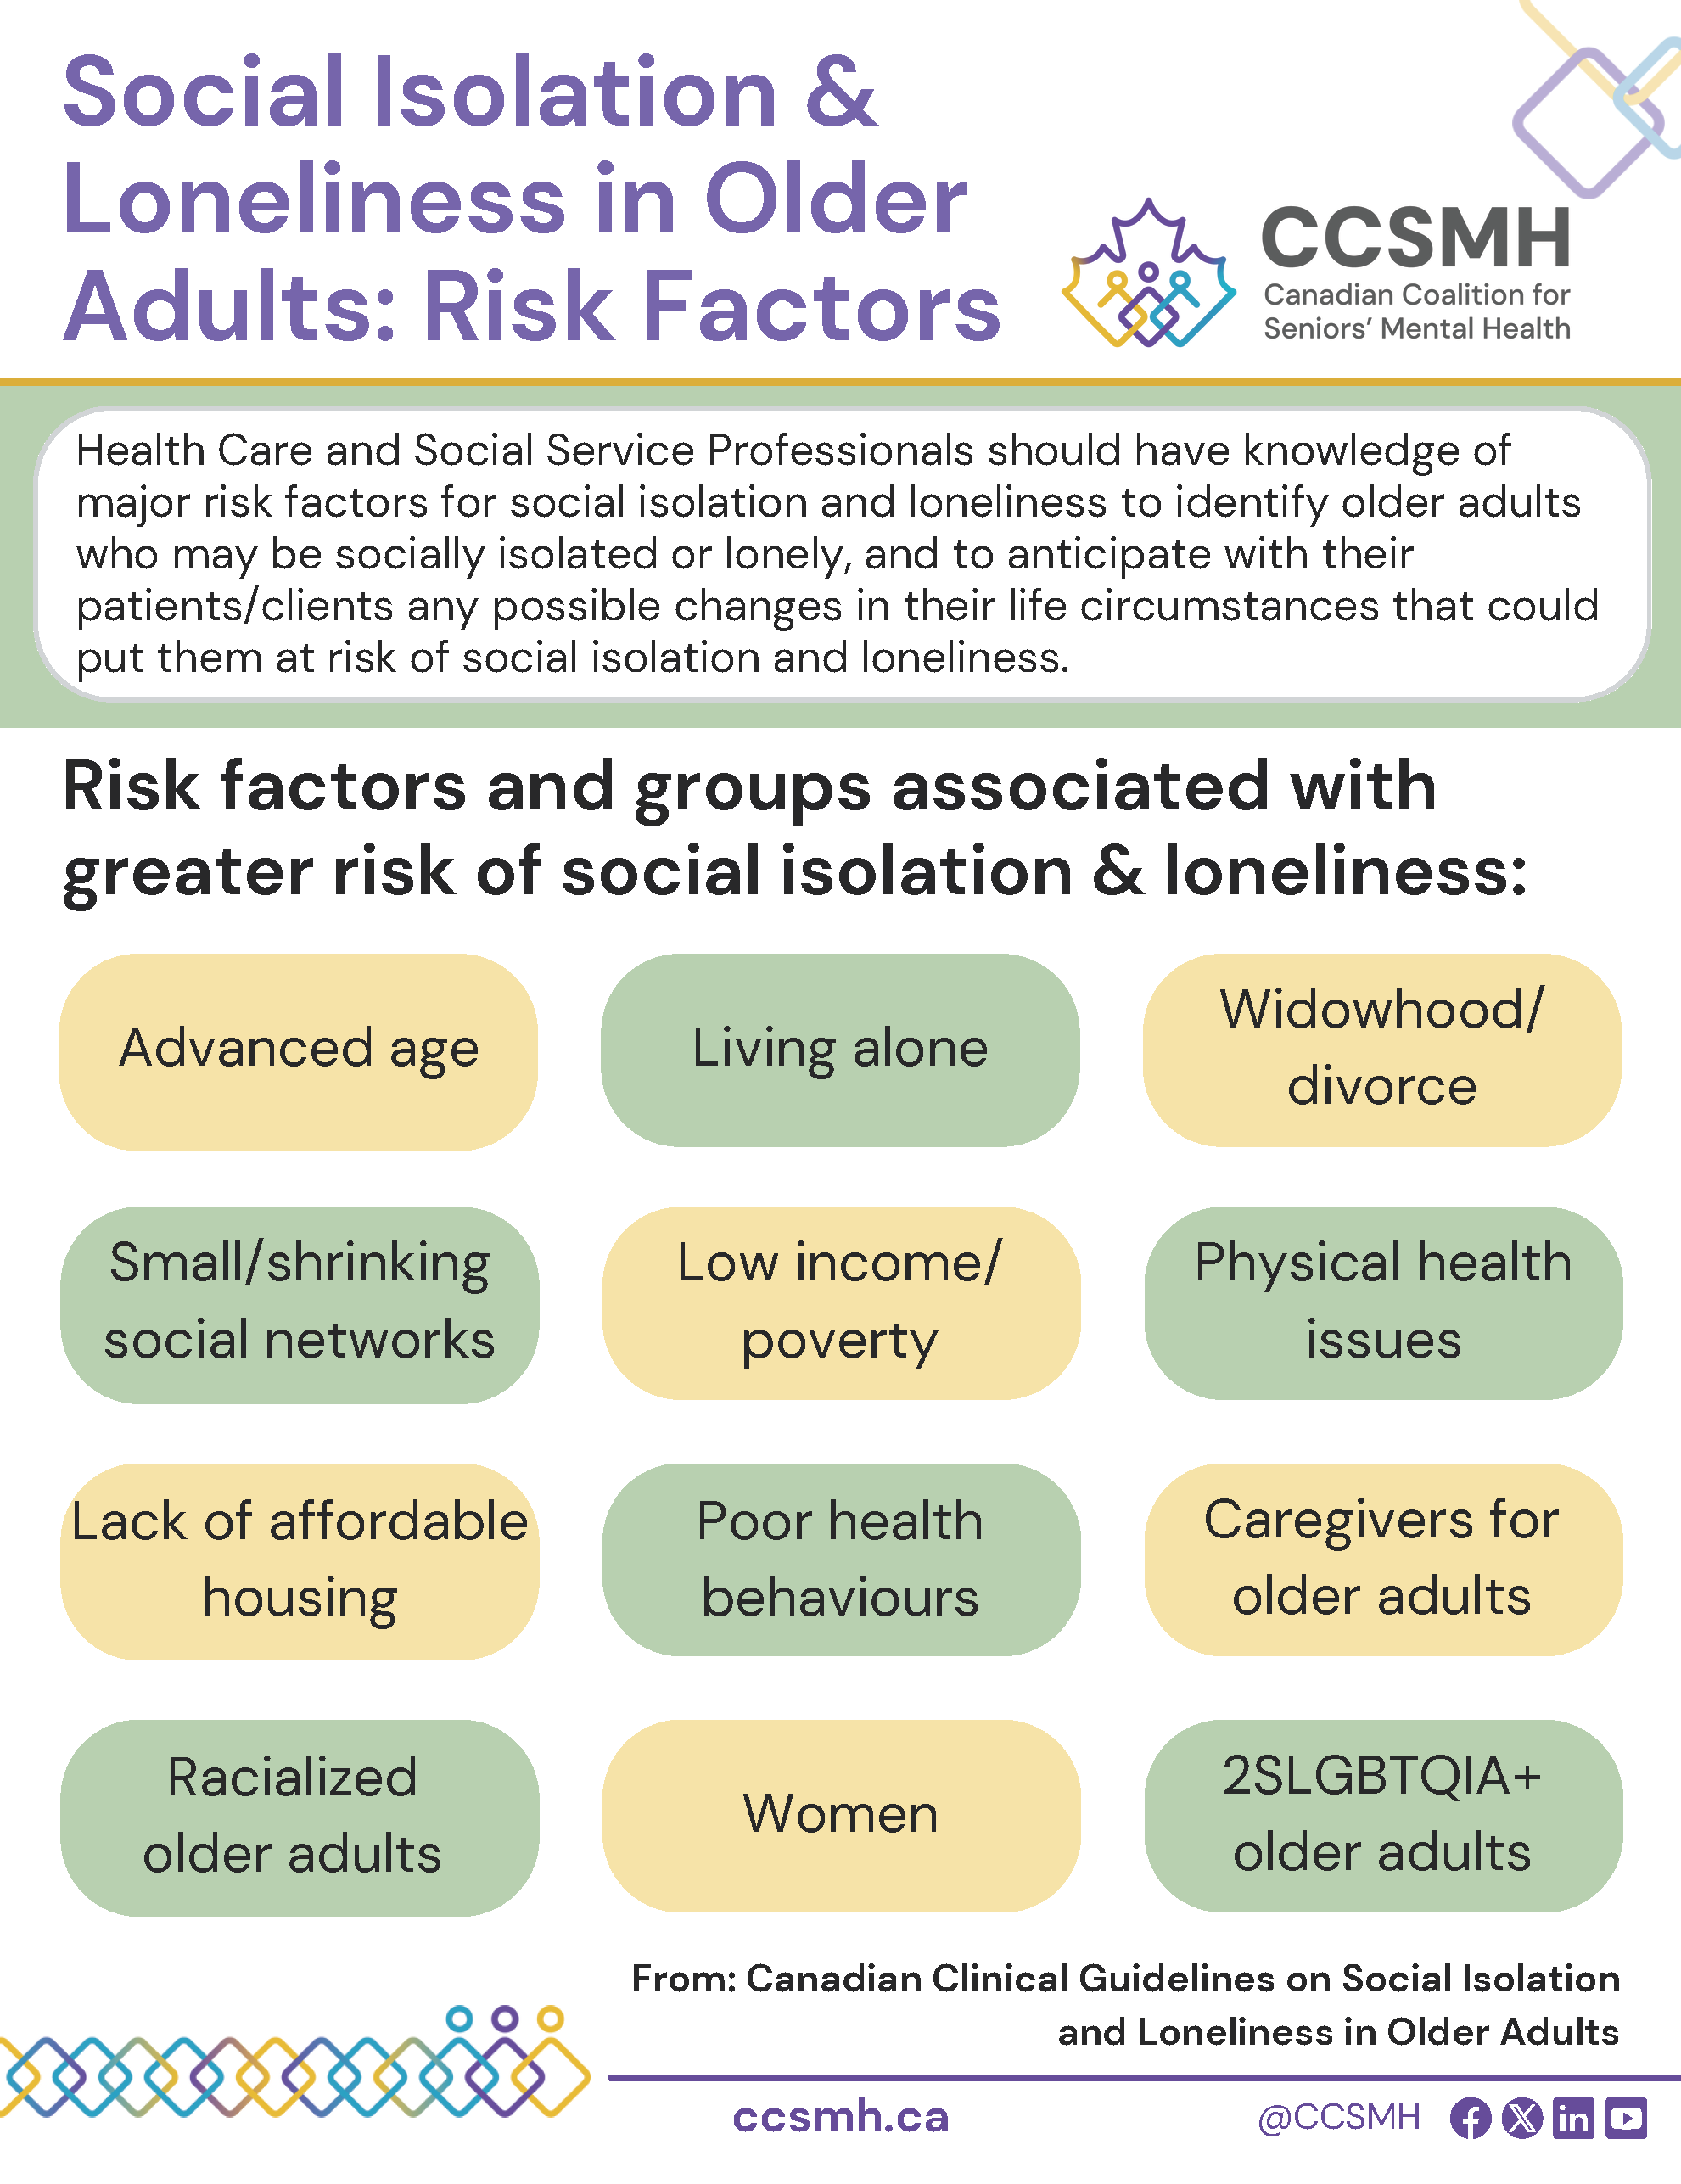 Social Isolation and Loneliness - Risk Factors info sheet